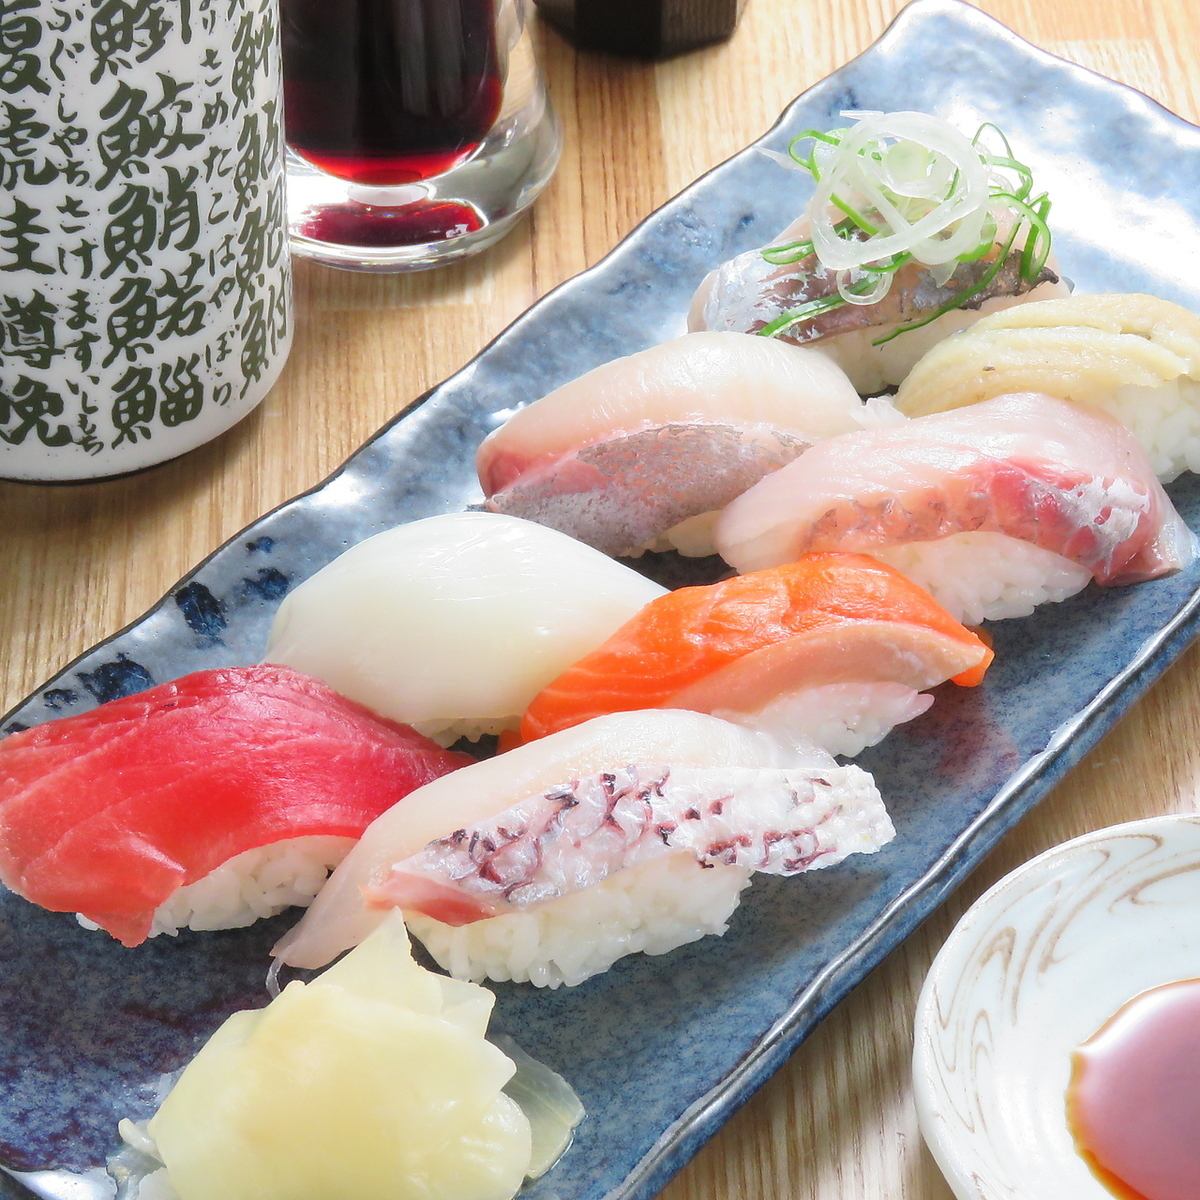 You can enjoy authentic sushi at a reasonable price ♪